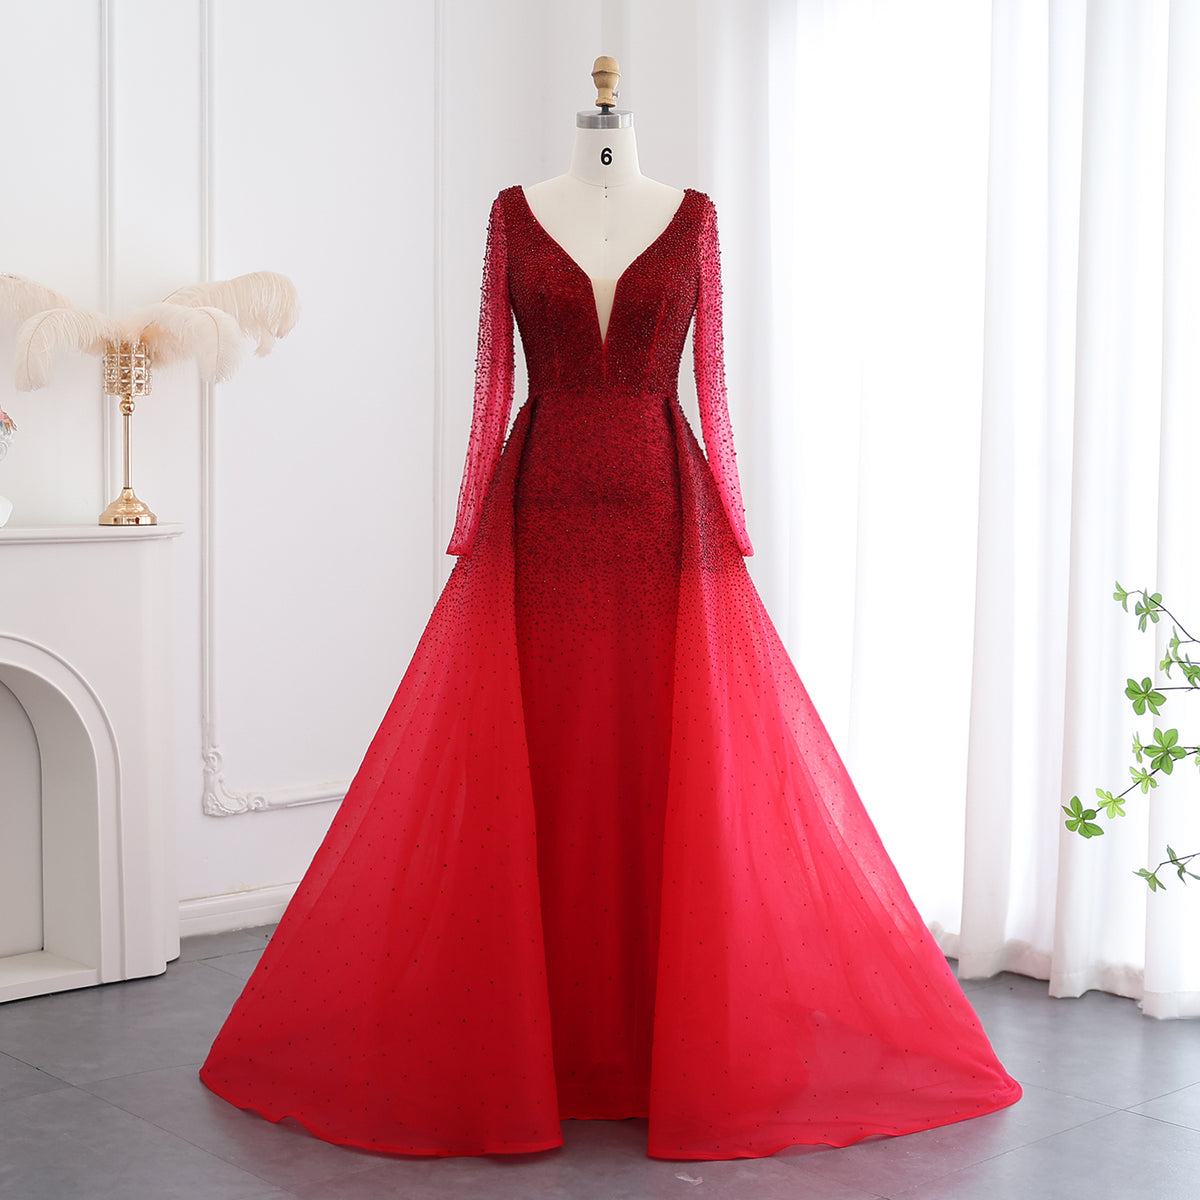 Sharon Said Luxury Crystal Burgundy Evening Dresses with Overskirt Long Sleeves Elegant Arabic Women Wedding Party Gowns SS293